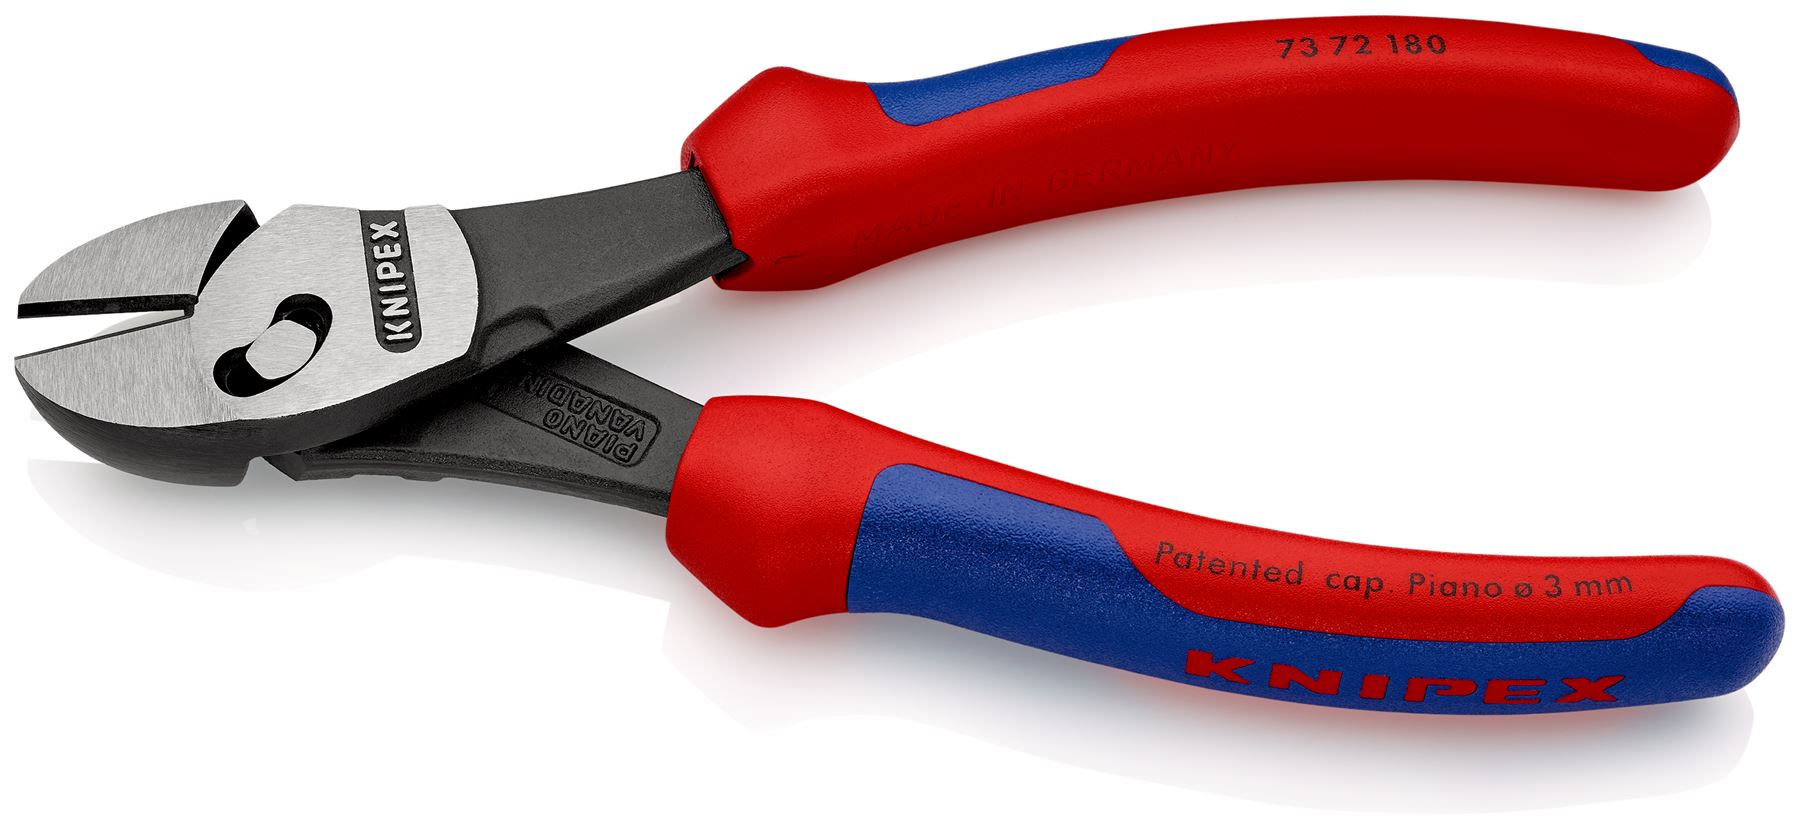 Knipex TwinForce High Performance Diagonal Cutters Cutting Pliers 180mm Multi Component Grips 73 72 180